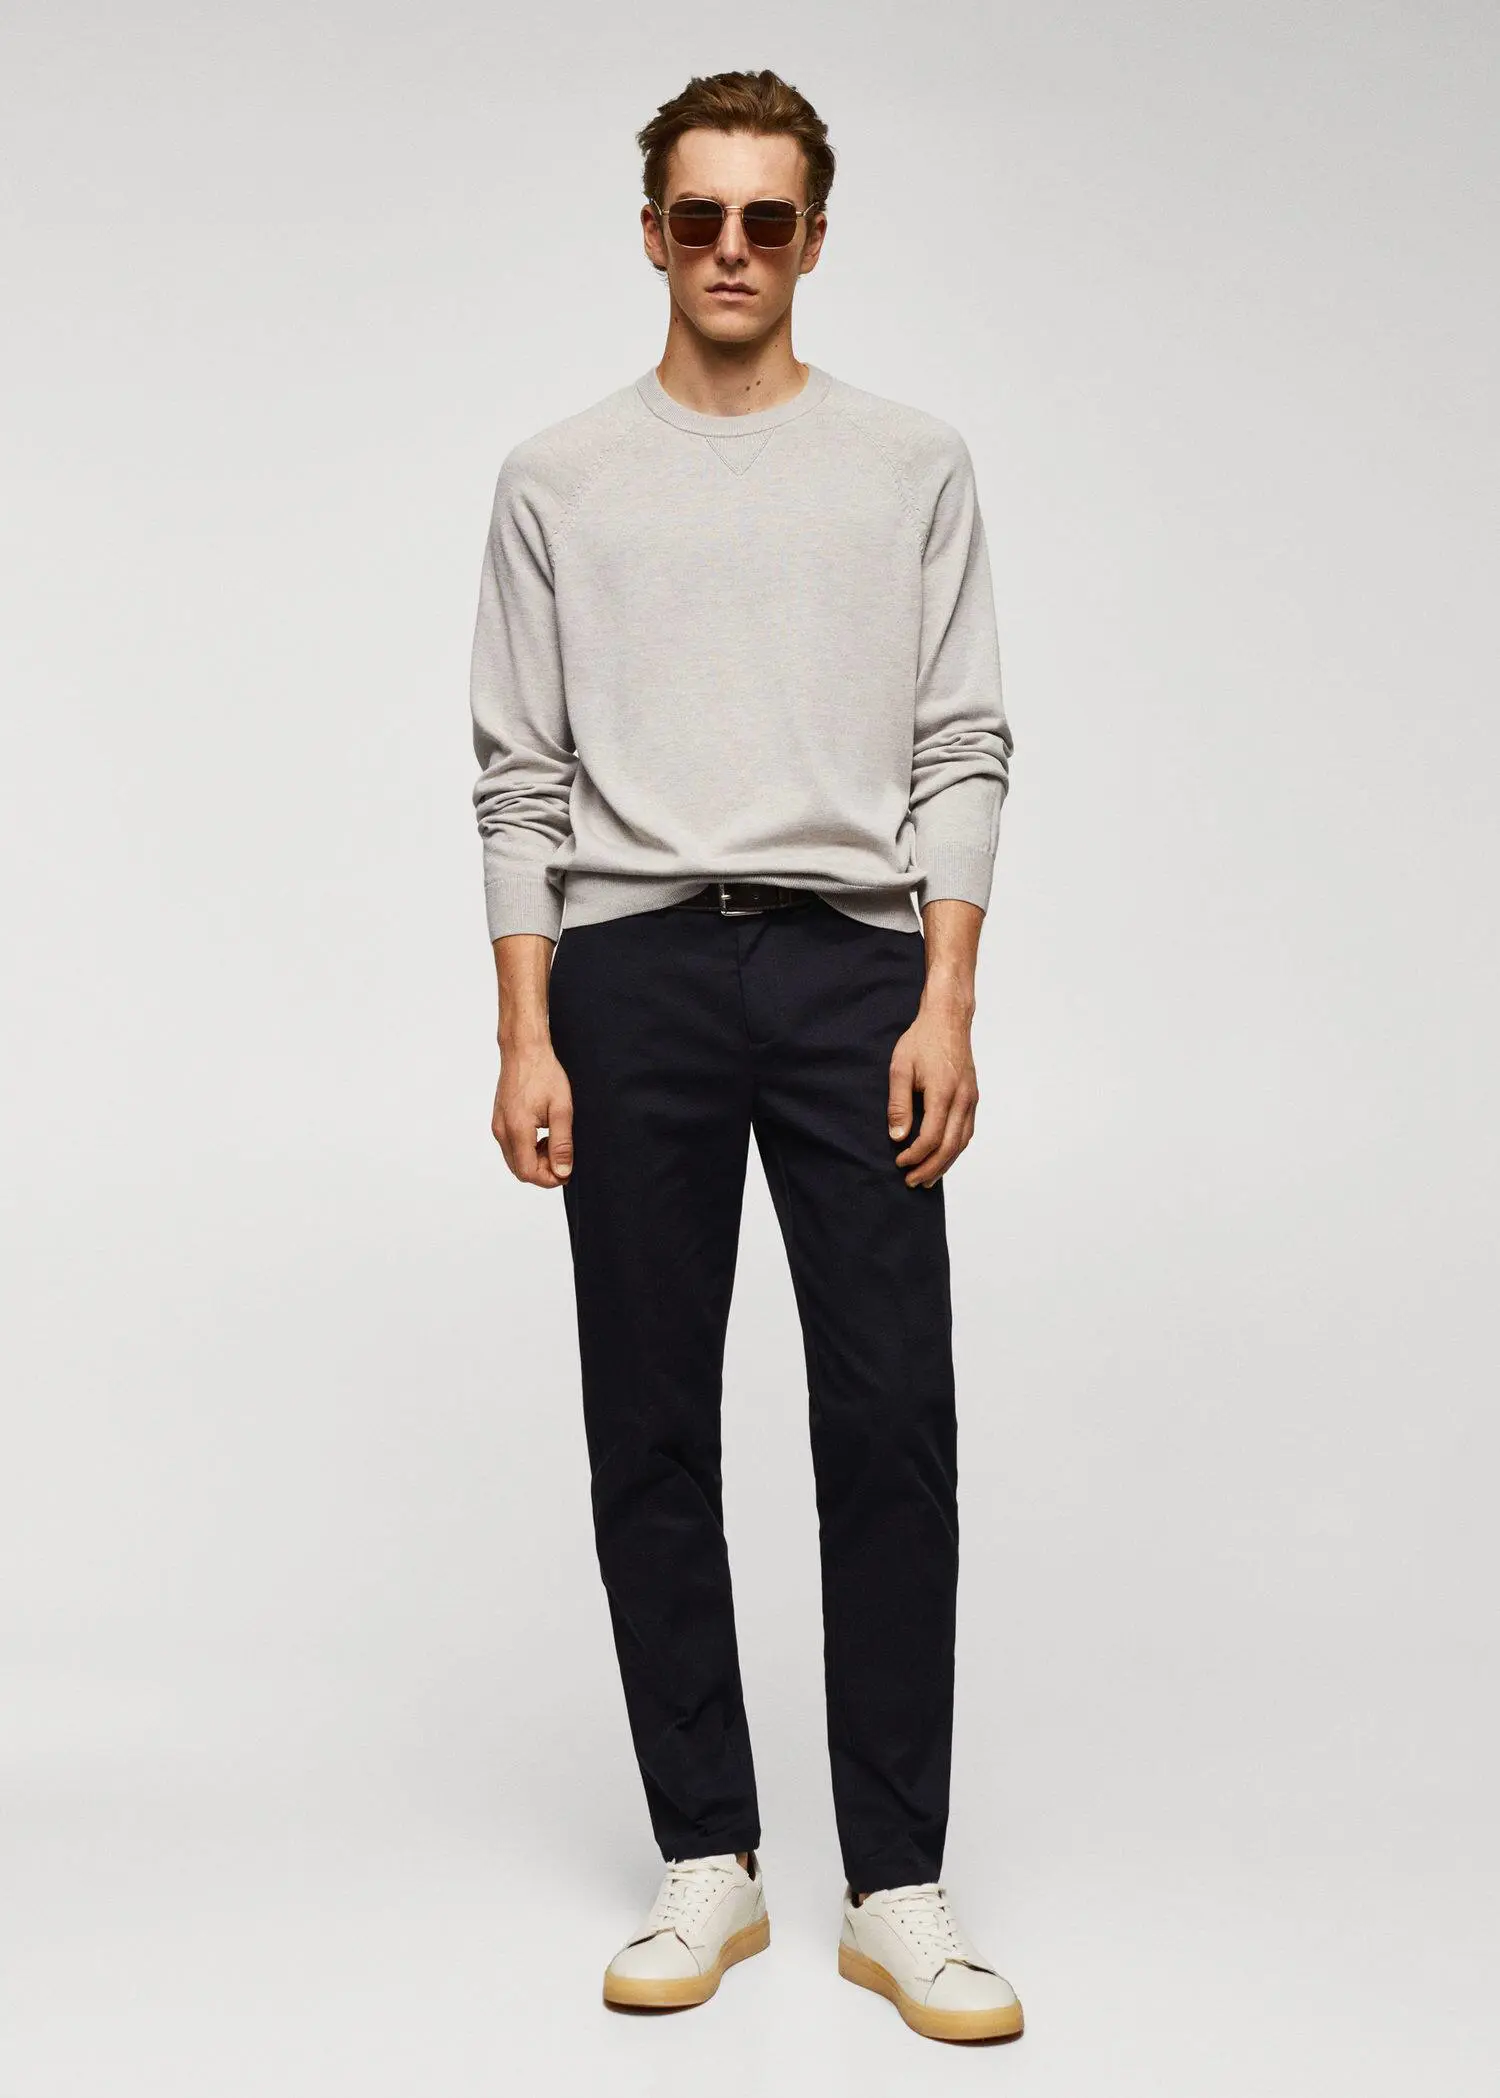 Mango Fine-knit cotton sweater. a man in a white shirt and black pants. 